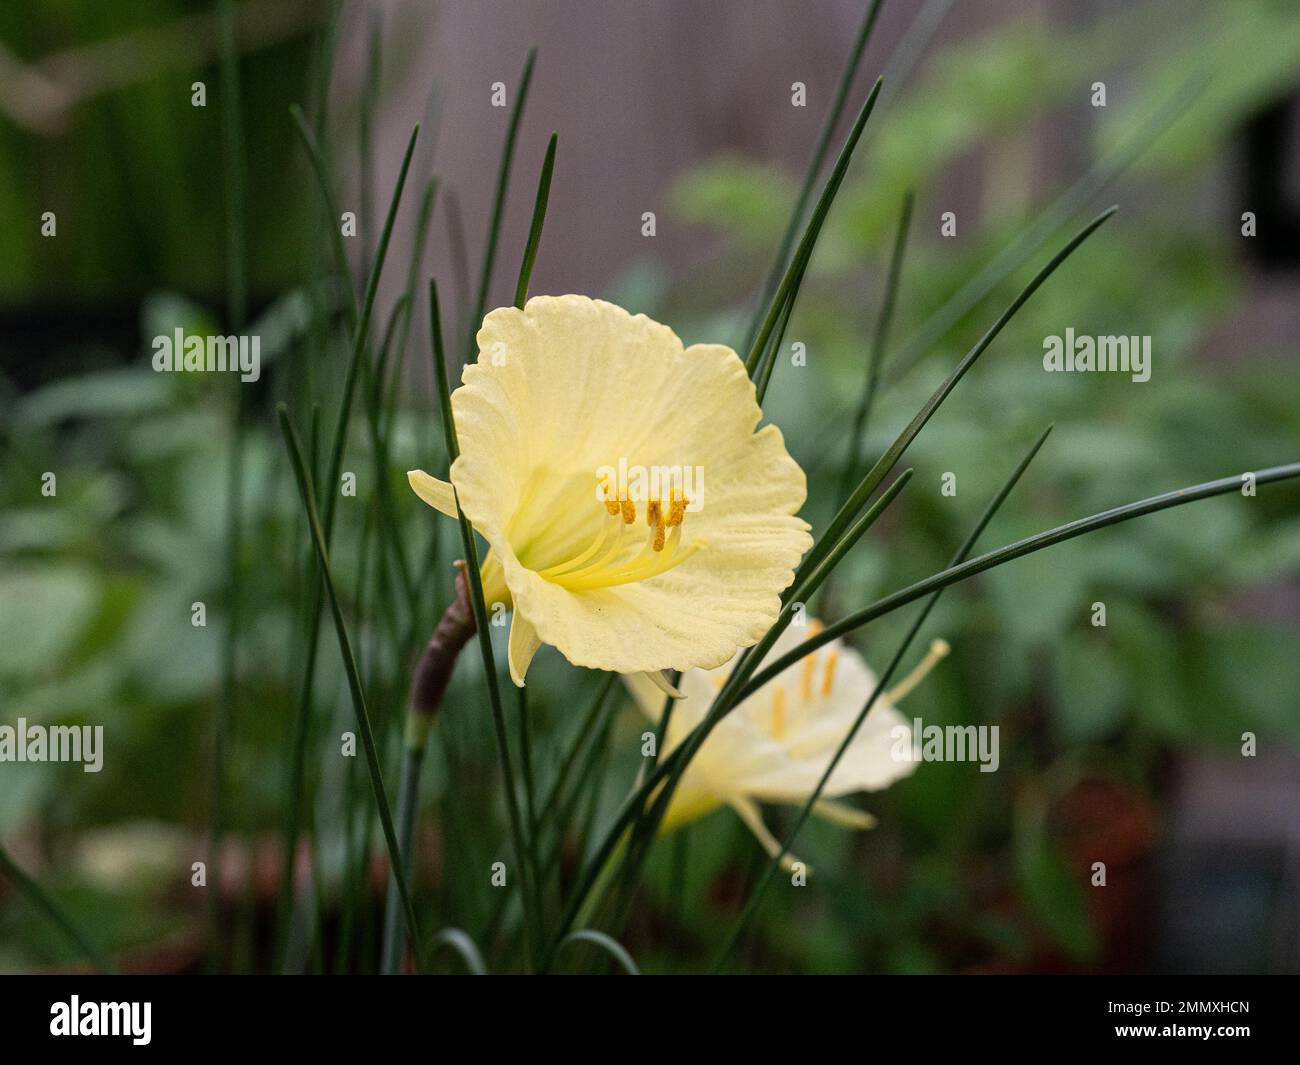 A close up of the primrose yellow trumpet shaped flower of the miniature daffodil Narcissus romieuxii Stock Photo